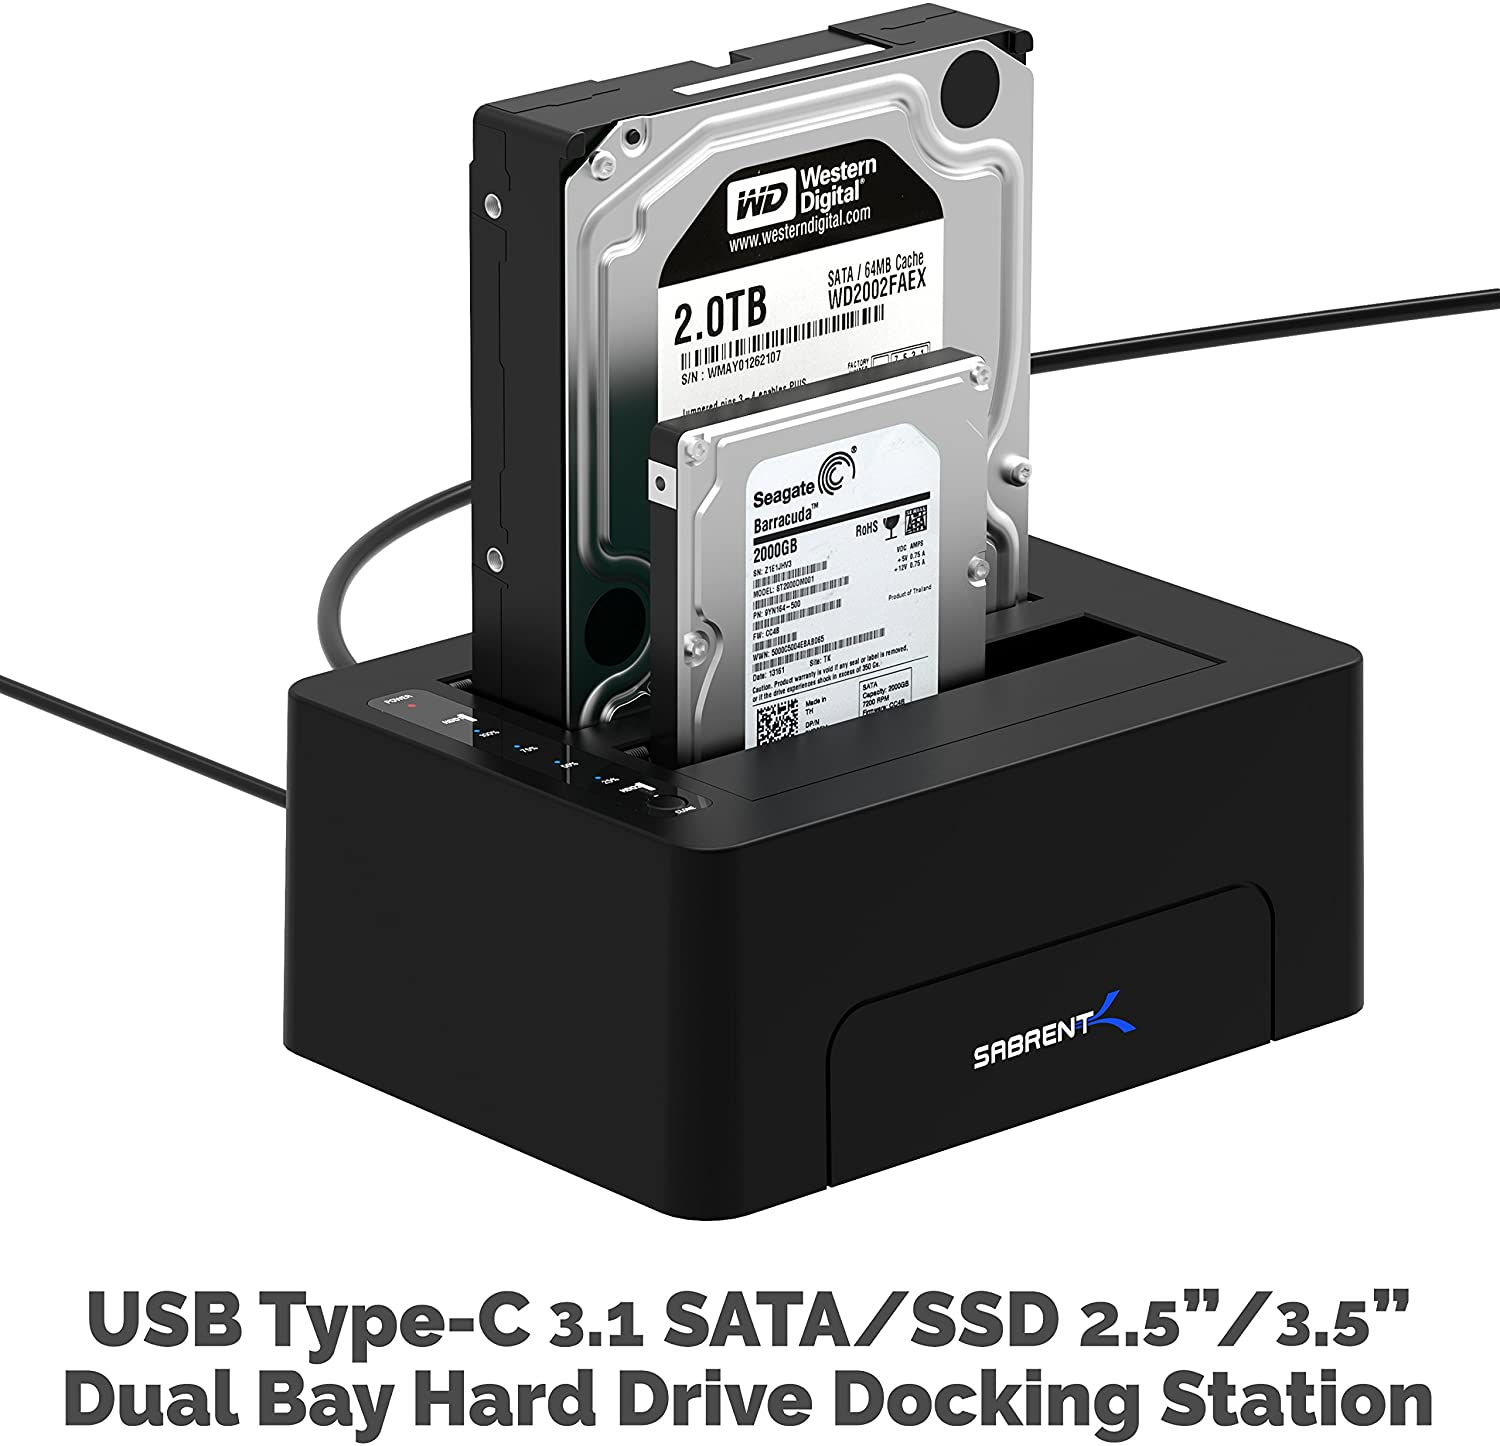 SABRENT USB 3.1 to SATA Dual Bay Hard Drive Docking Station for 2.5 or 3.5in HDD, SSD. Hard Drive Duplicator/Cloner Function [Includes Both Type C and Type A Cables, Supports 20TB+ Drives] (DS-UTC2)